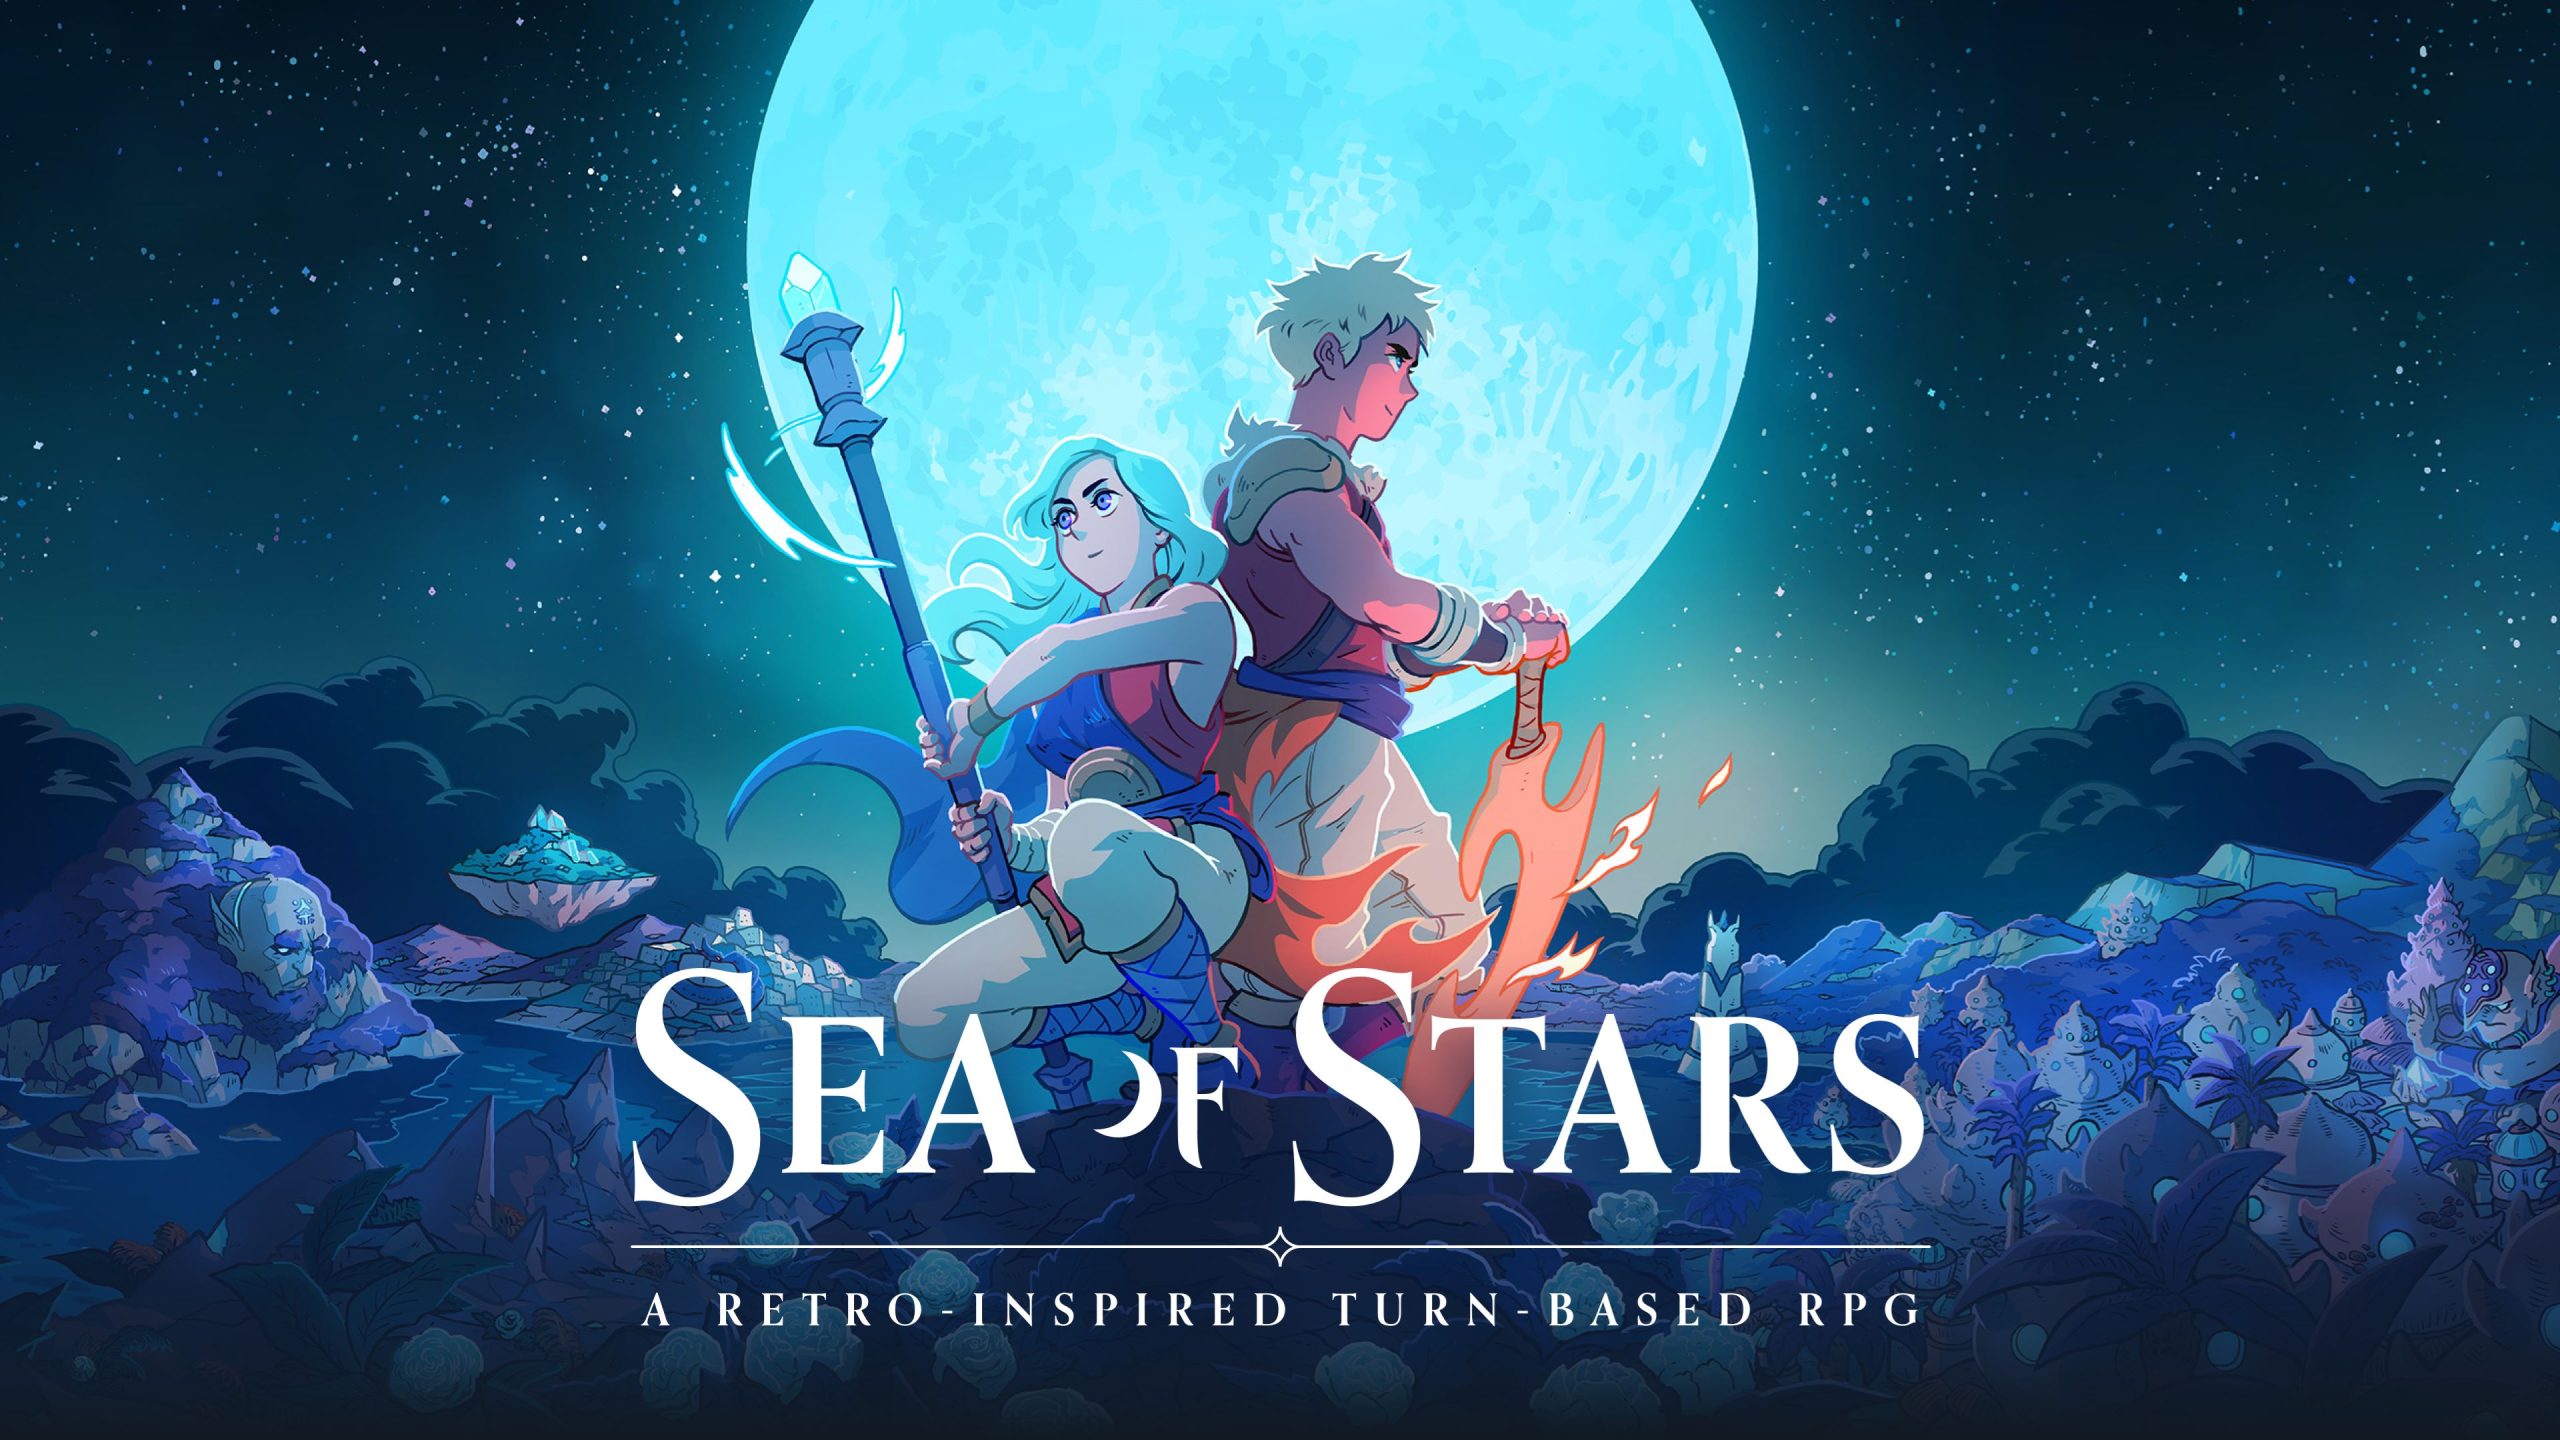 The key art for Sea of Stars.